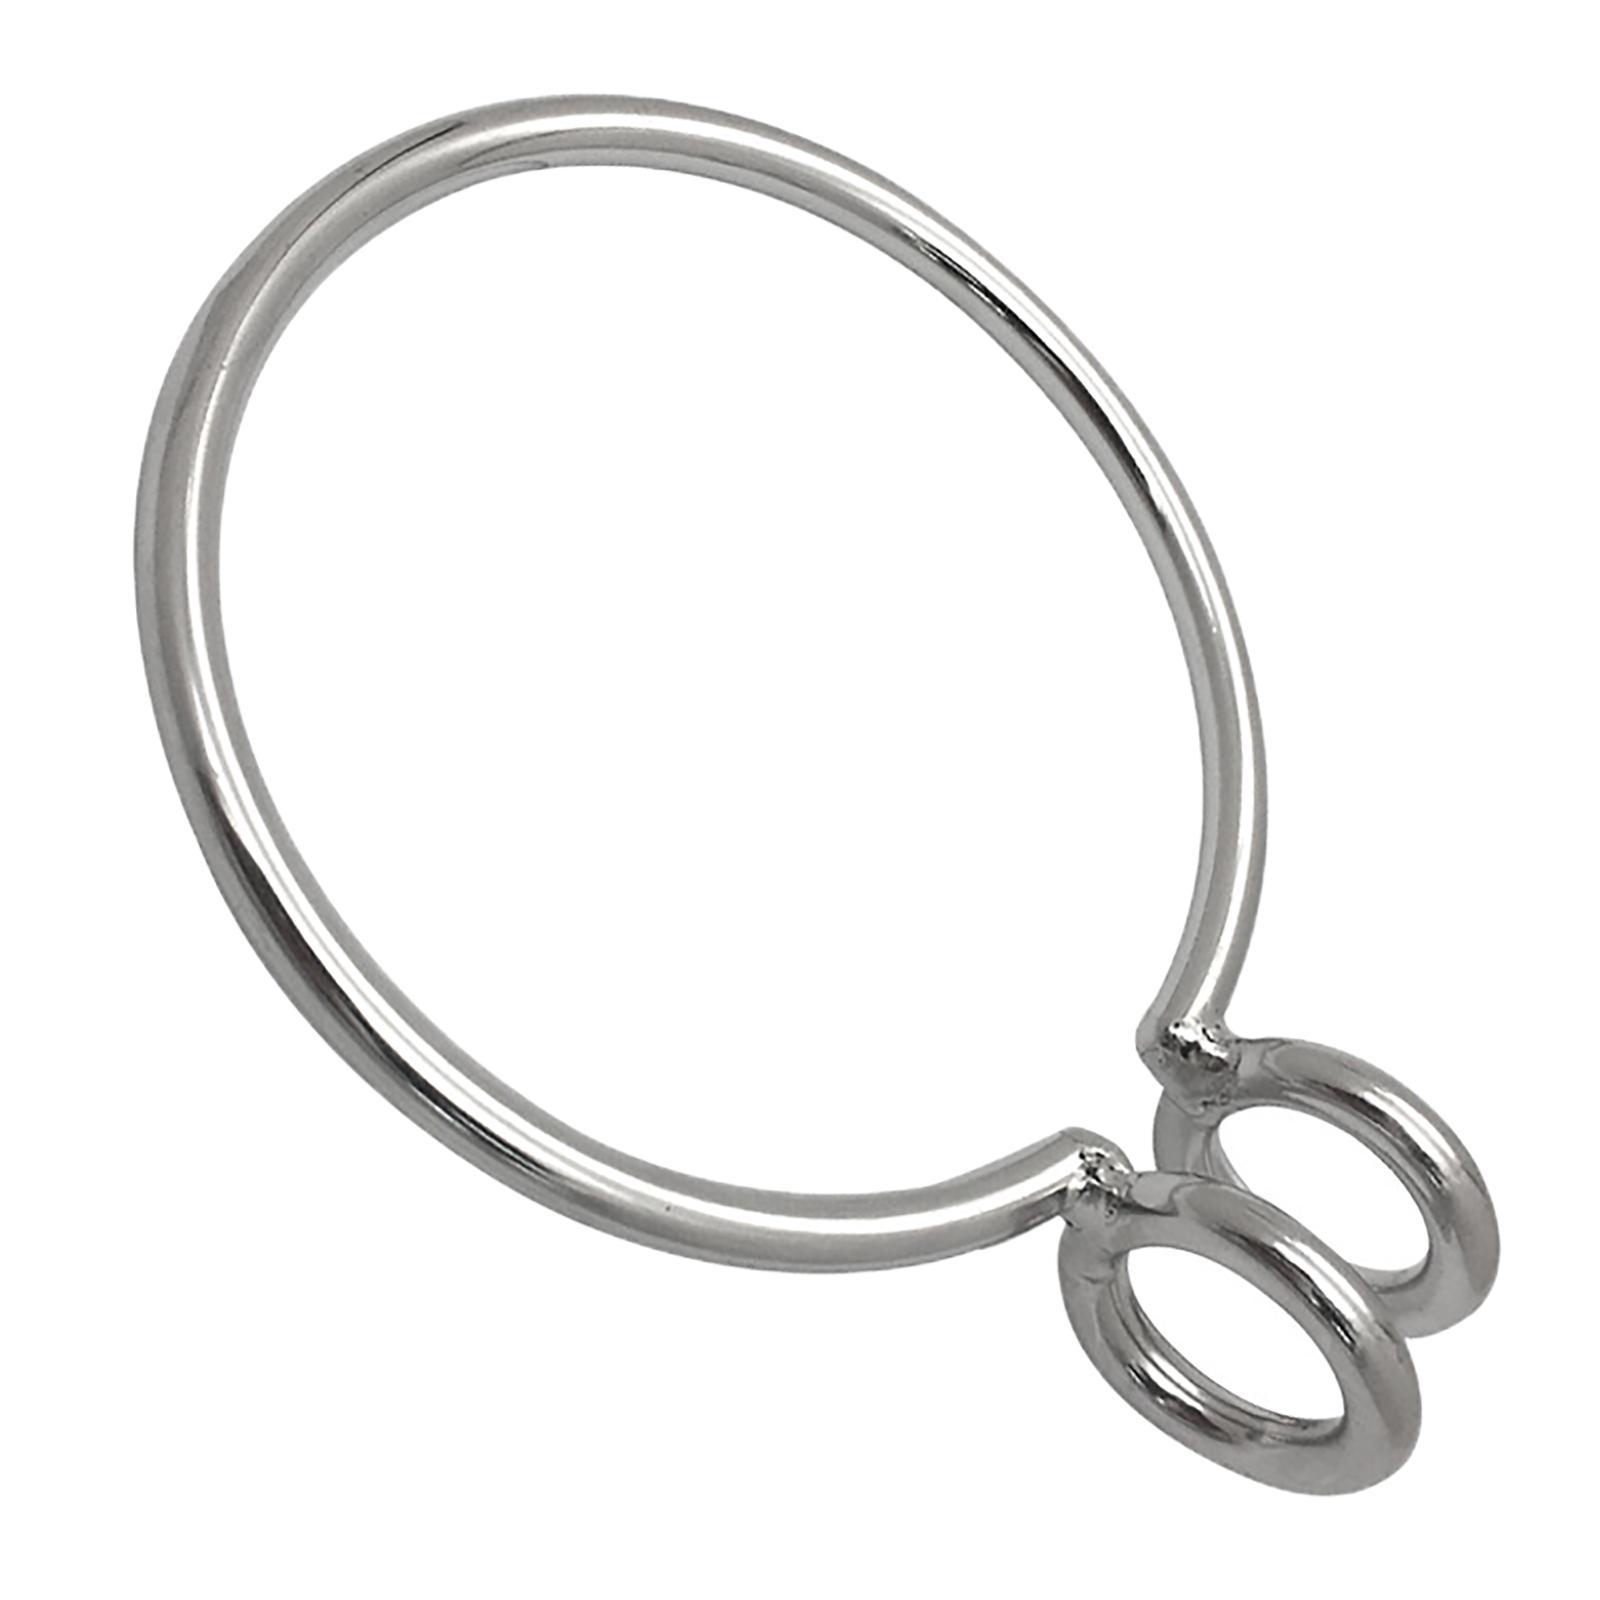 Anchor Retrieval Ring 8mm for Yacht Fishing Simple to Use Marine Sturdy 0.3 inch Diameter Accessories Easy to Install Premium Durable Solid